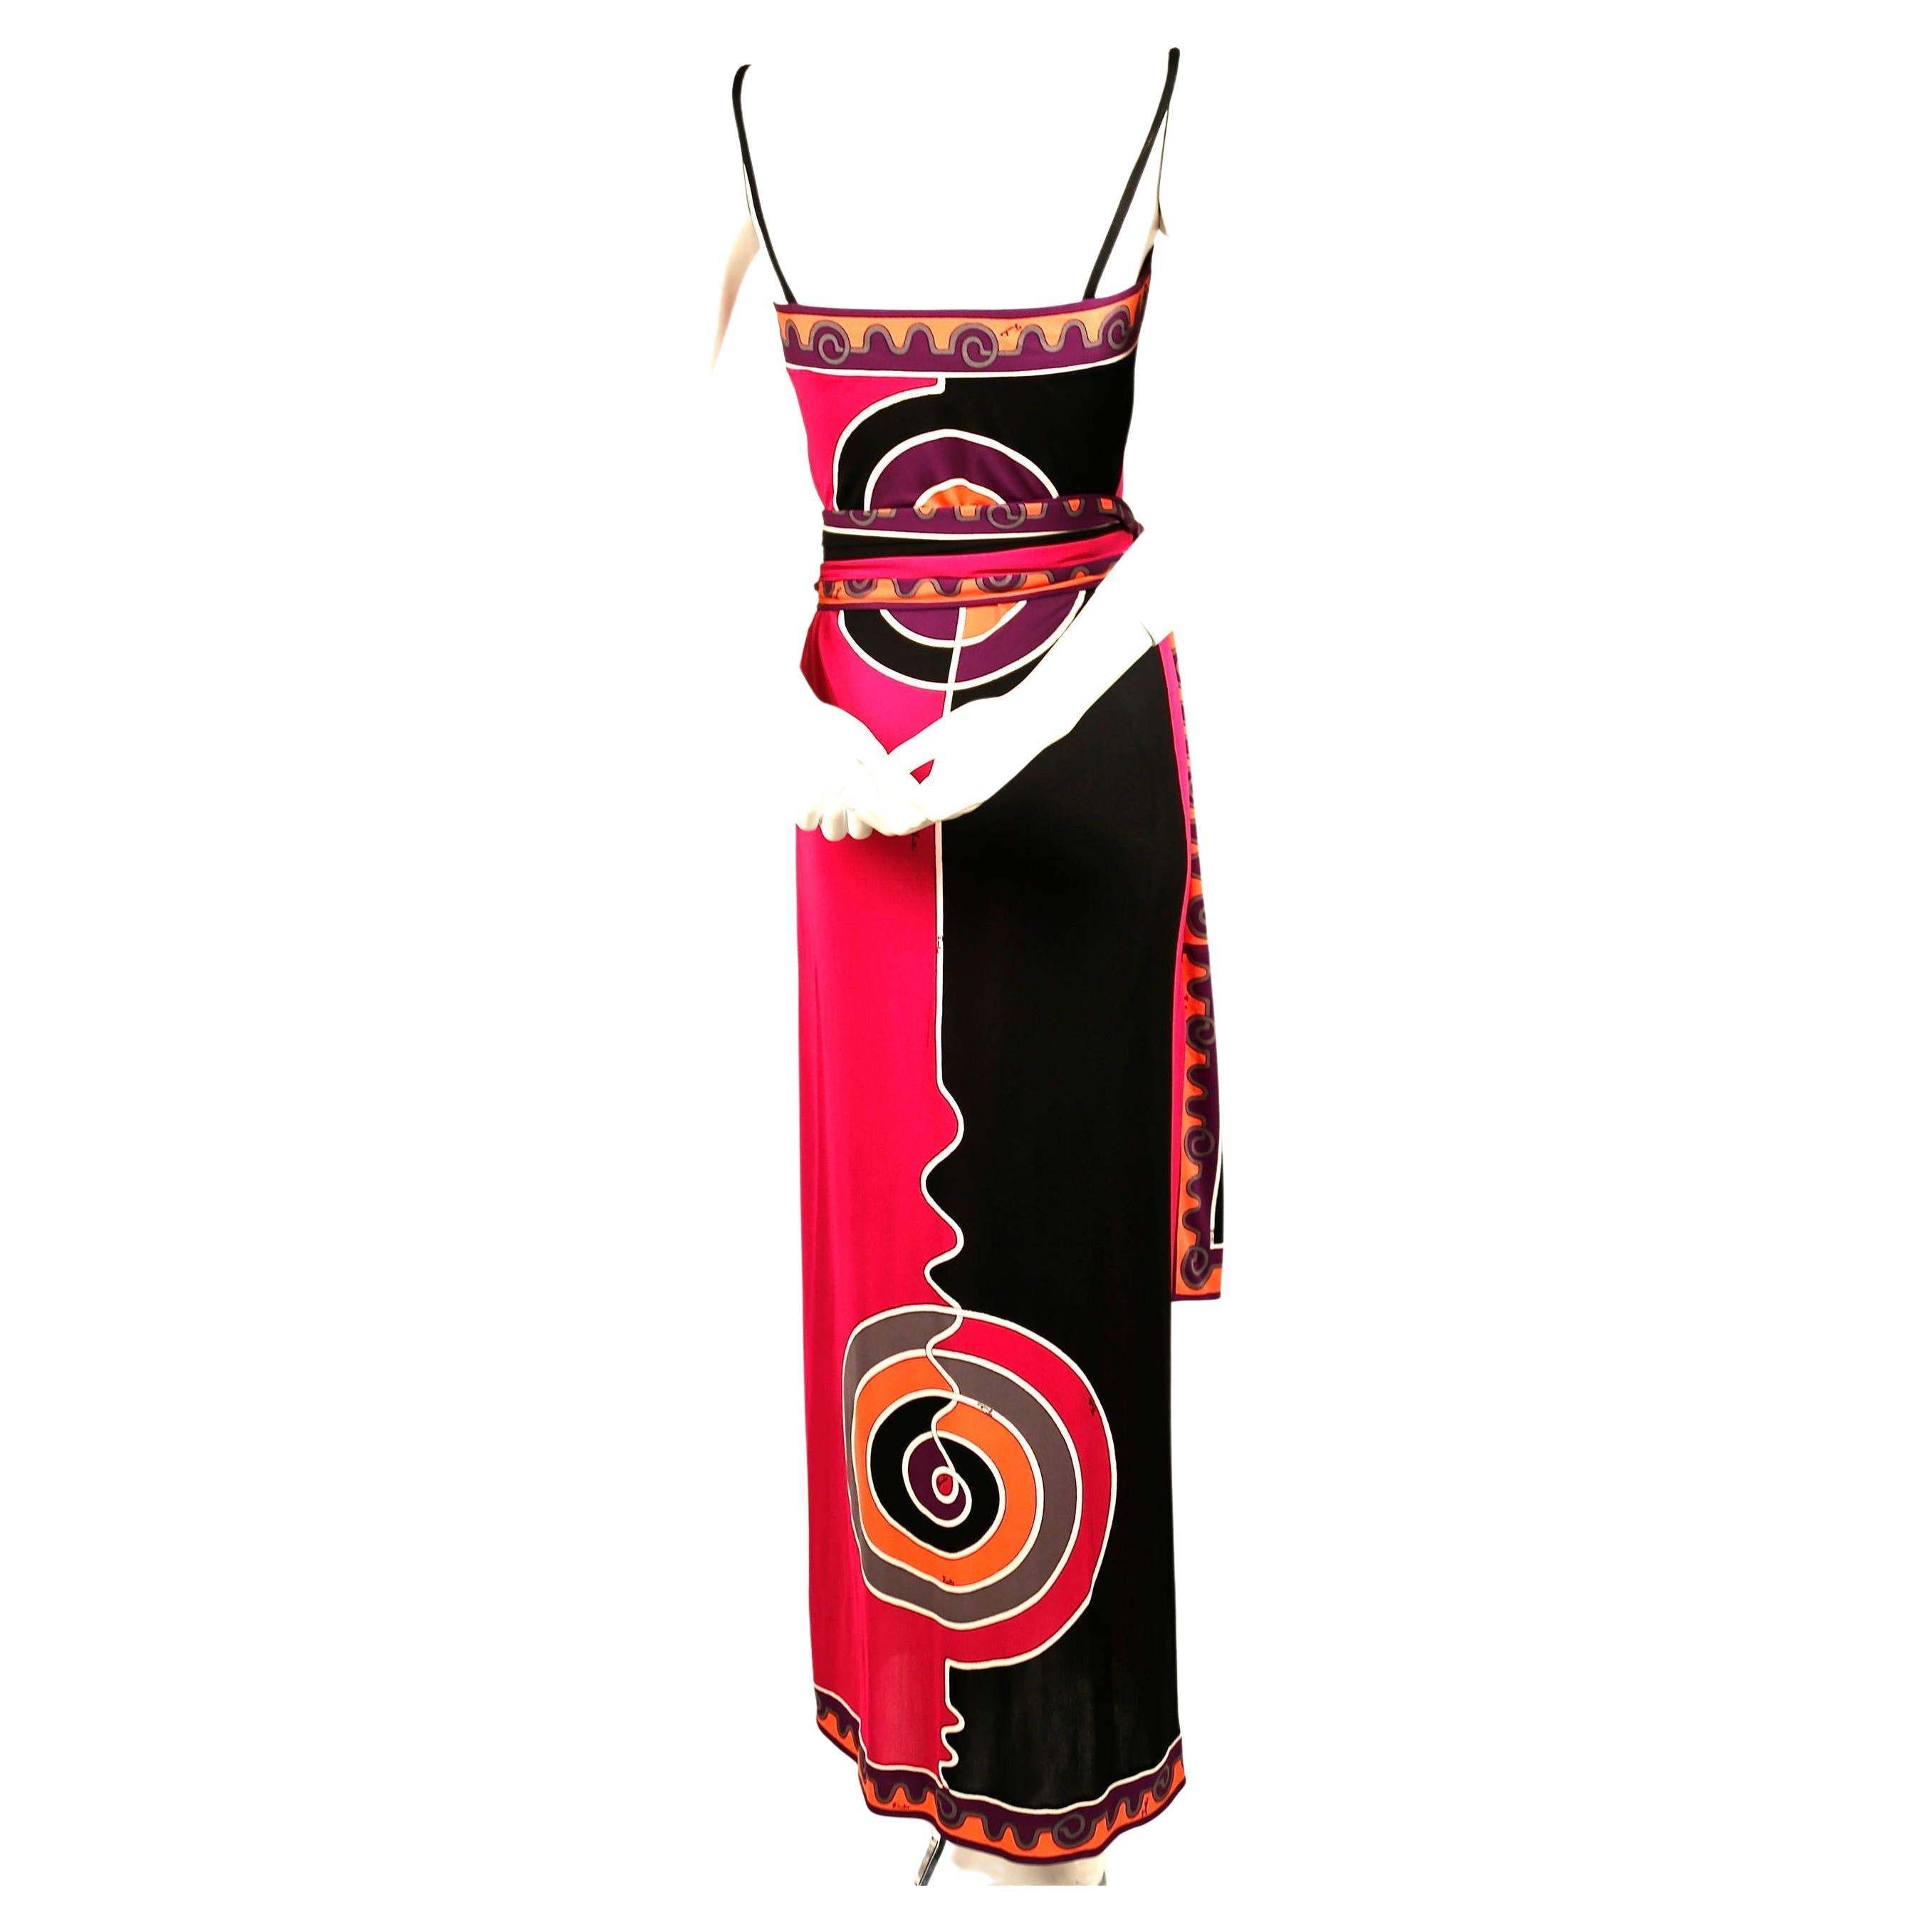 Women's Emilio Pucci silk printed jersey dress with matching belt, 1970s For Sale